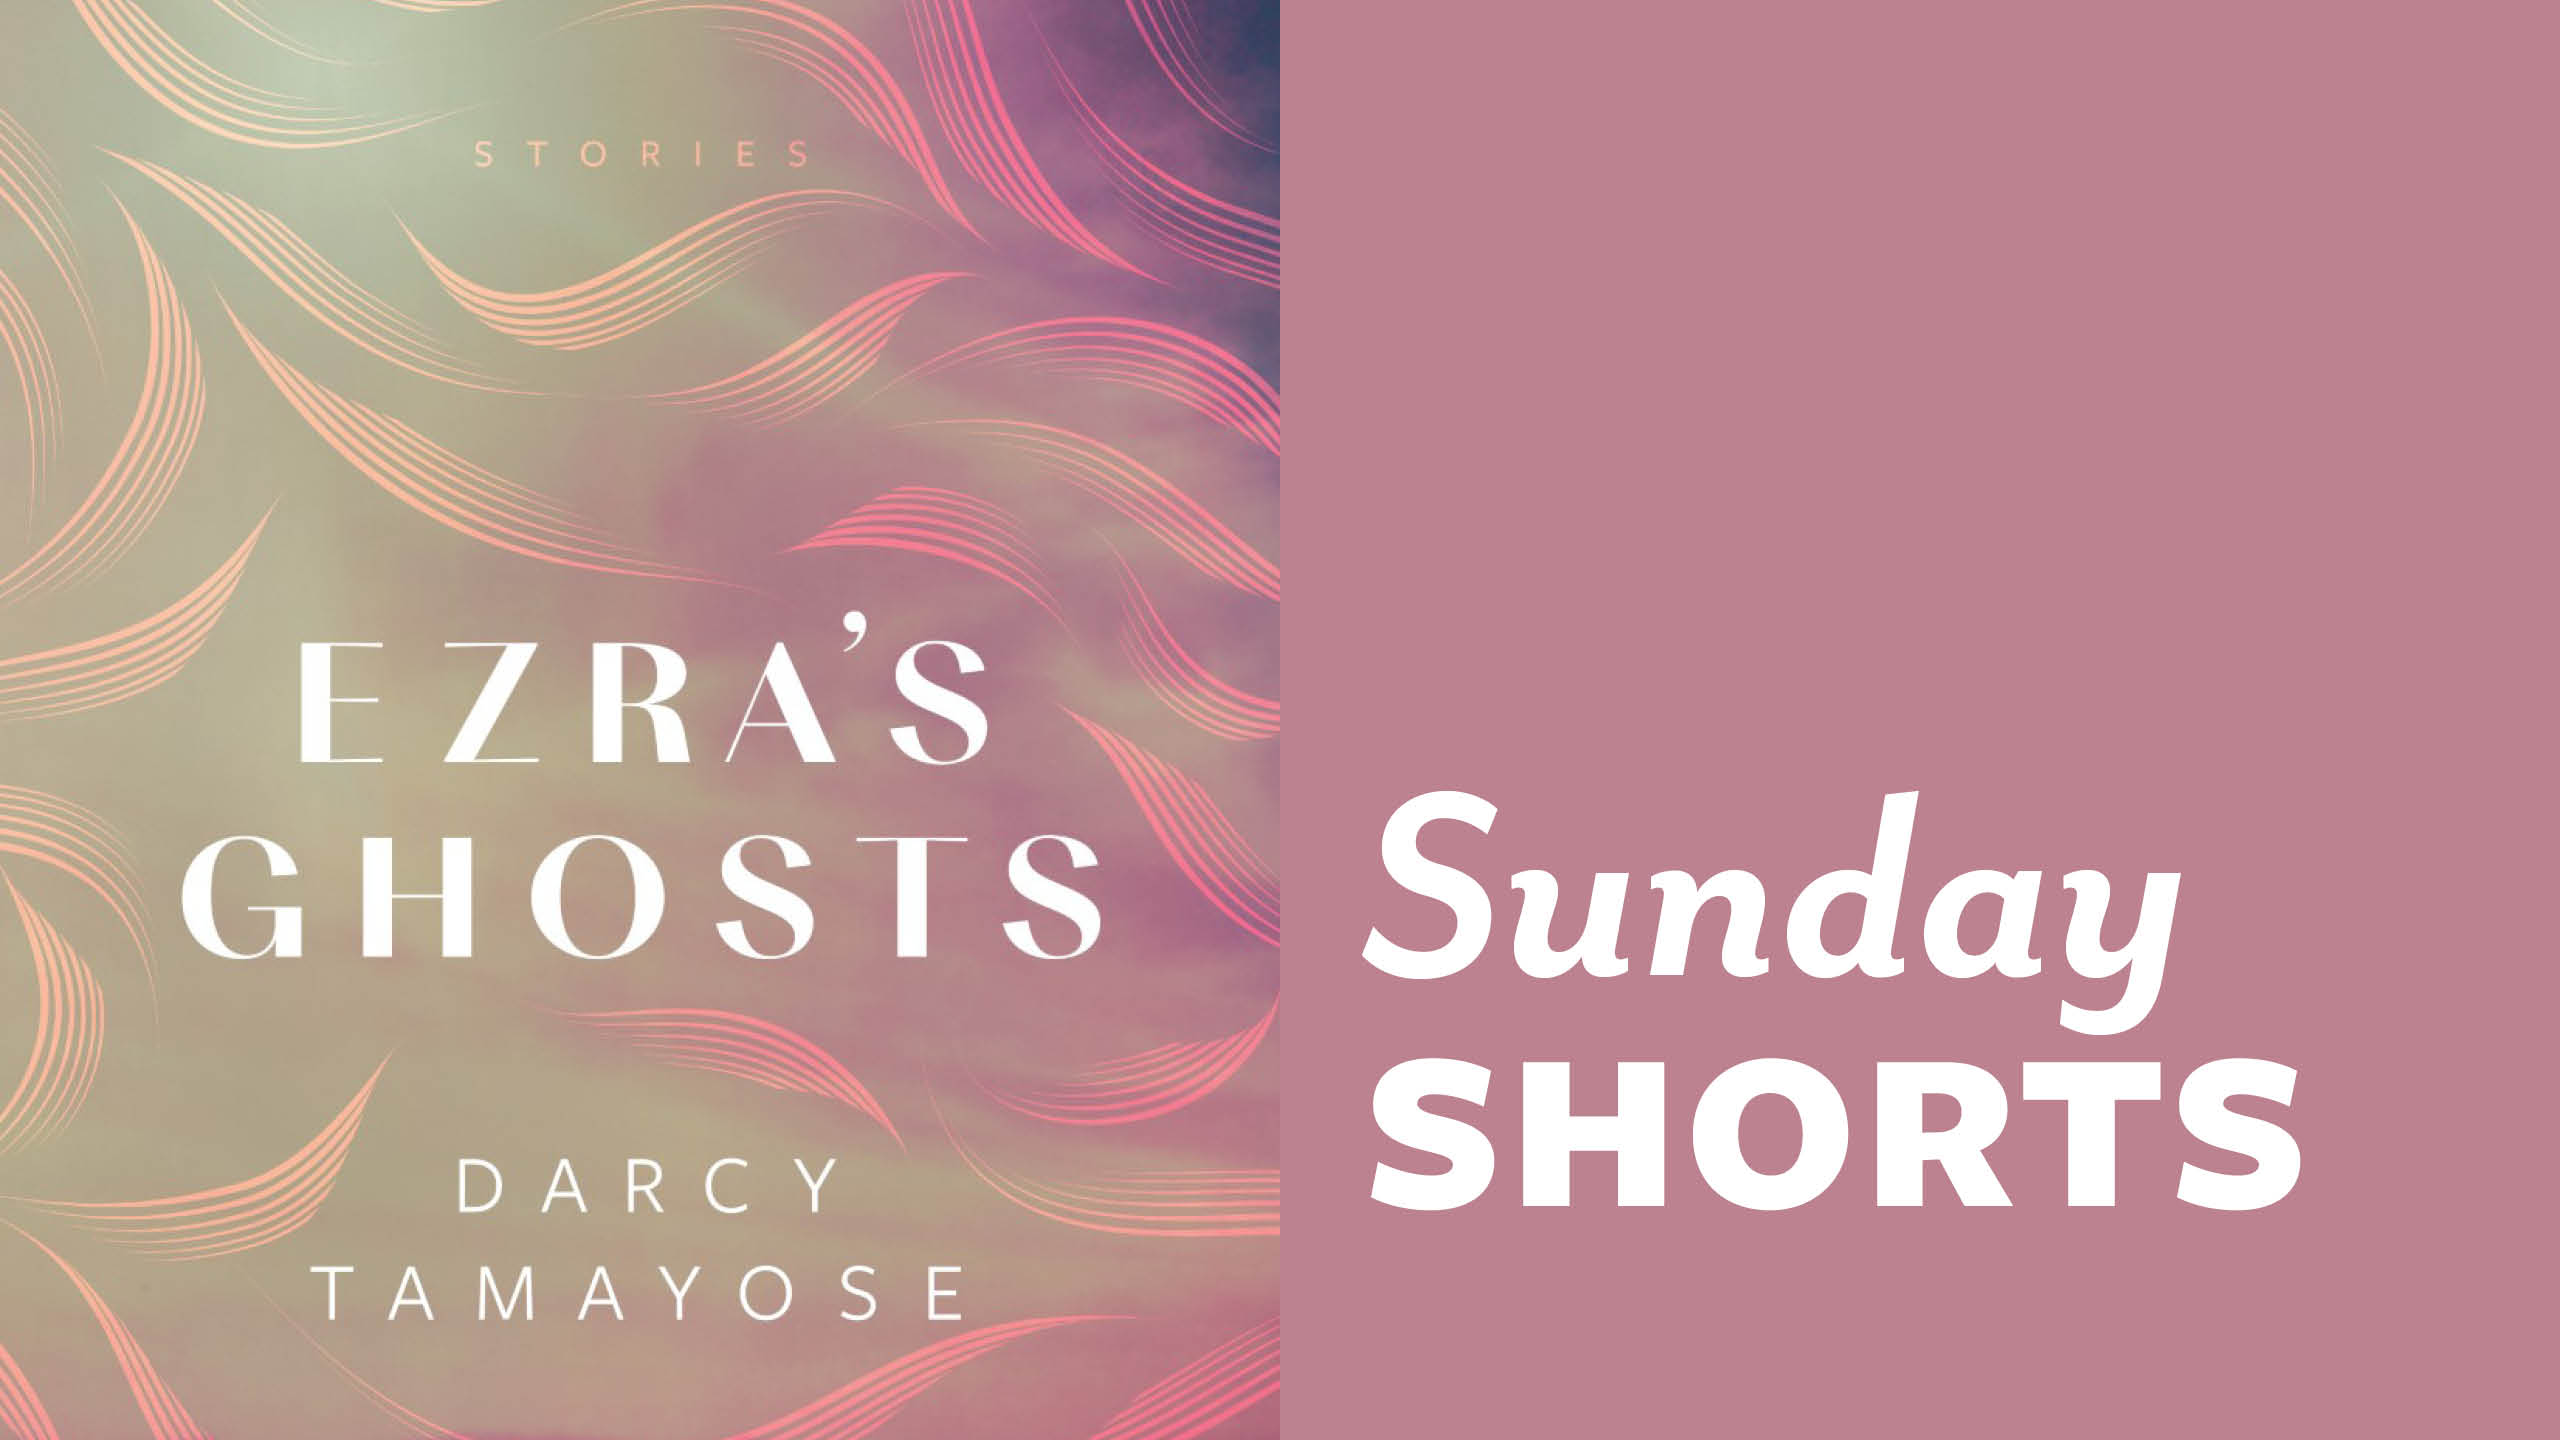 Sunday Shorts: Excerpt from Ezra's Ghosts by Darcy Tamayose